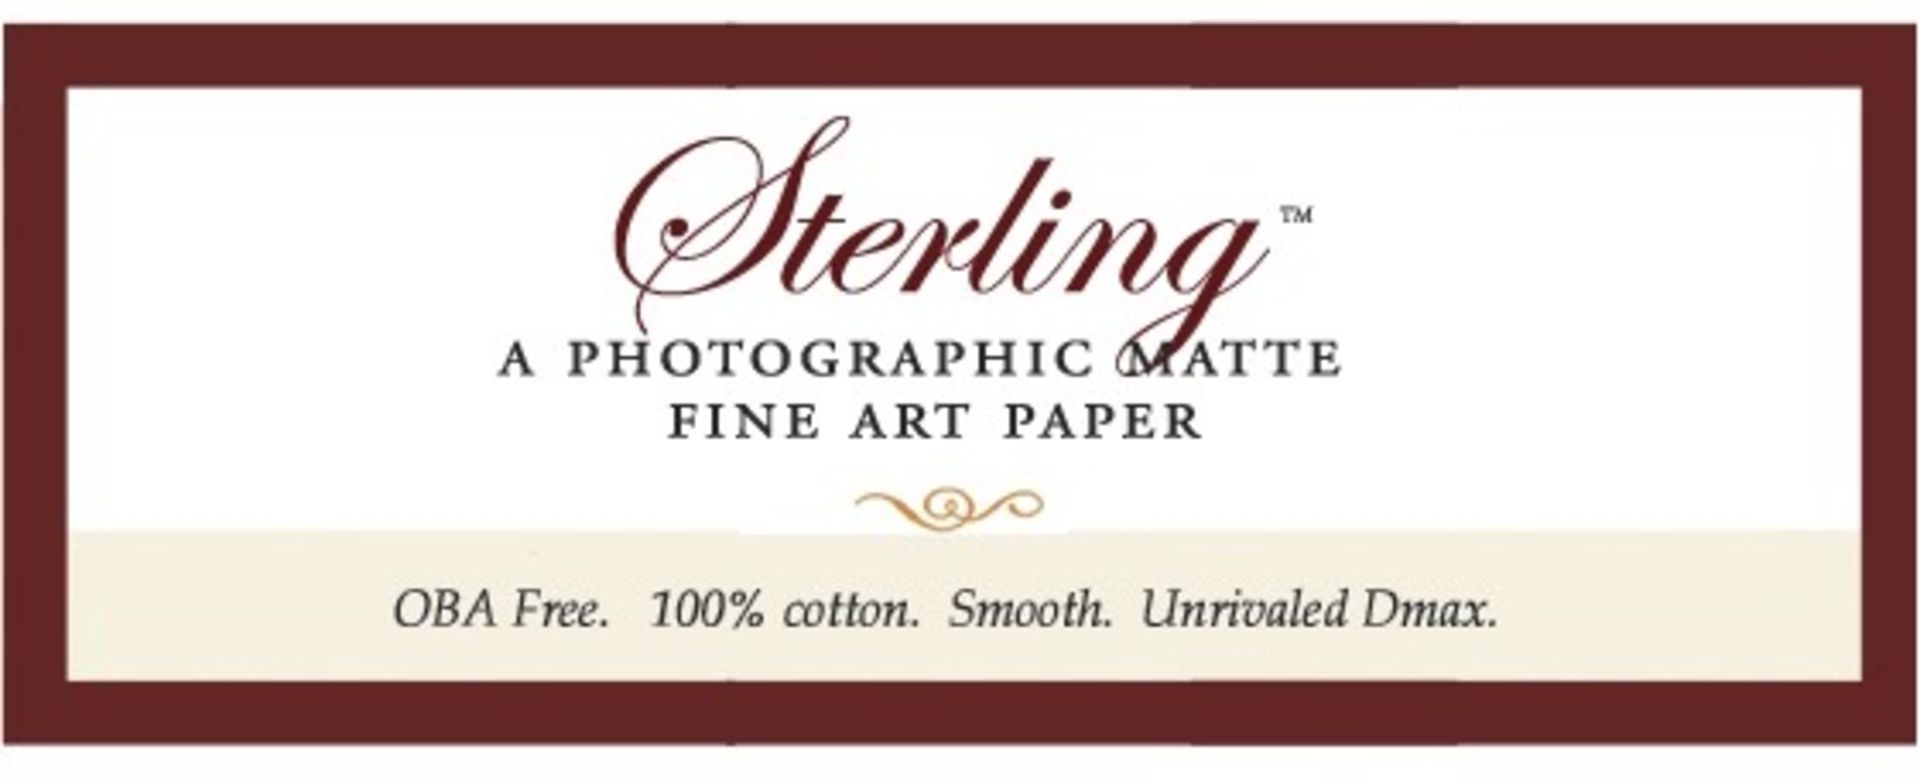 1 x Roll of Breathing Colour STERLING Photographic Matte Fine Art Paper - Size 44" x 50' - - Image 5 of 5